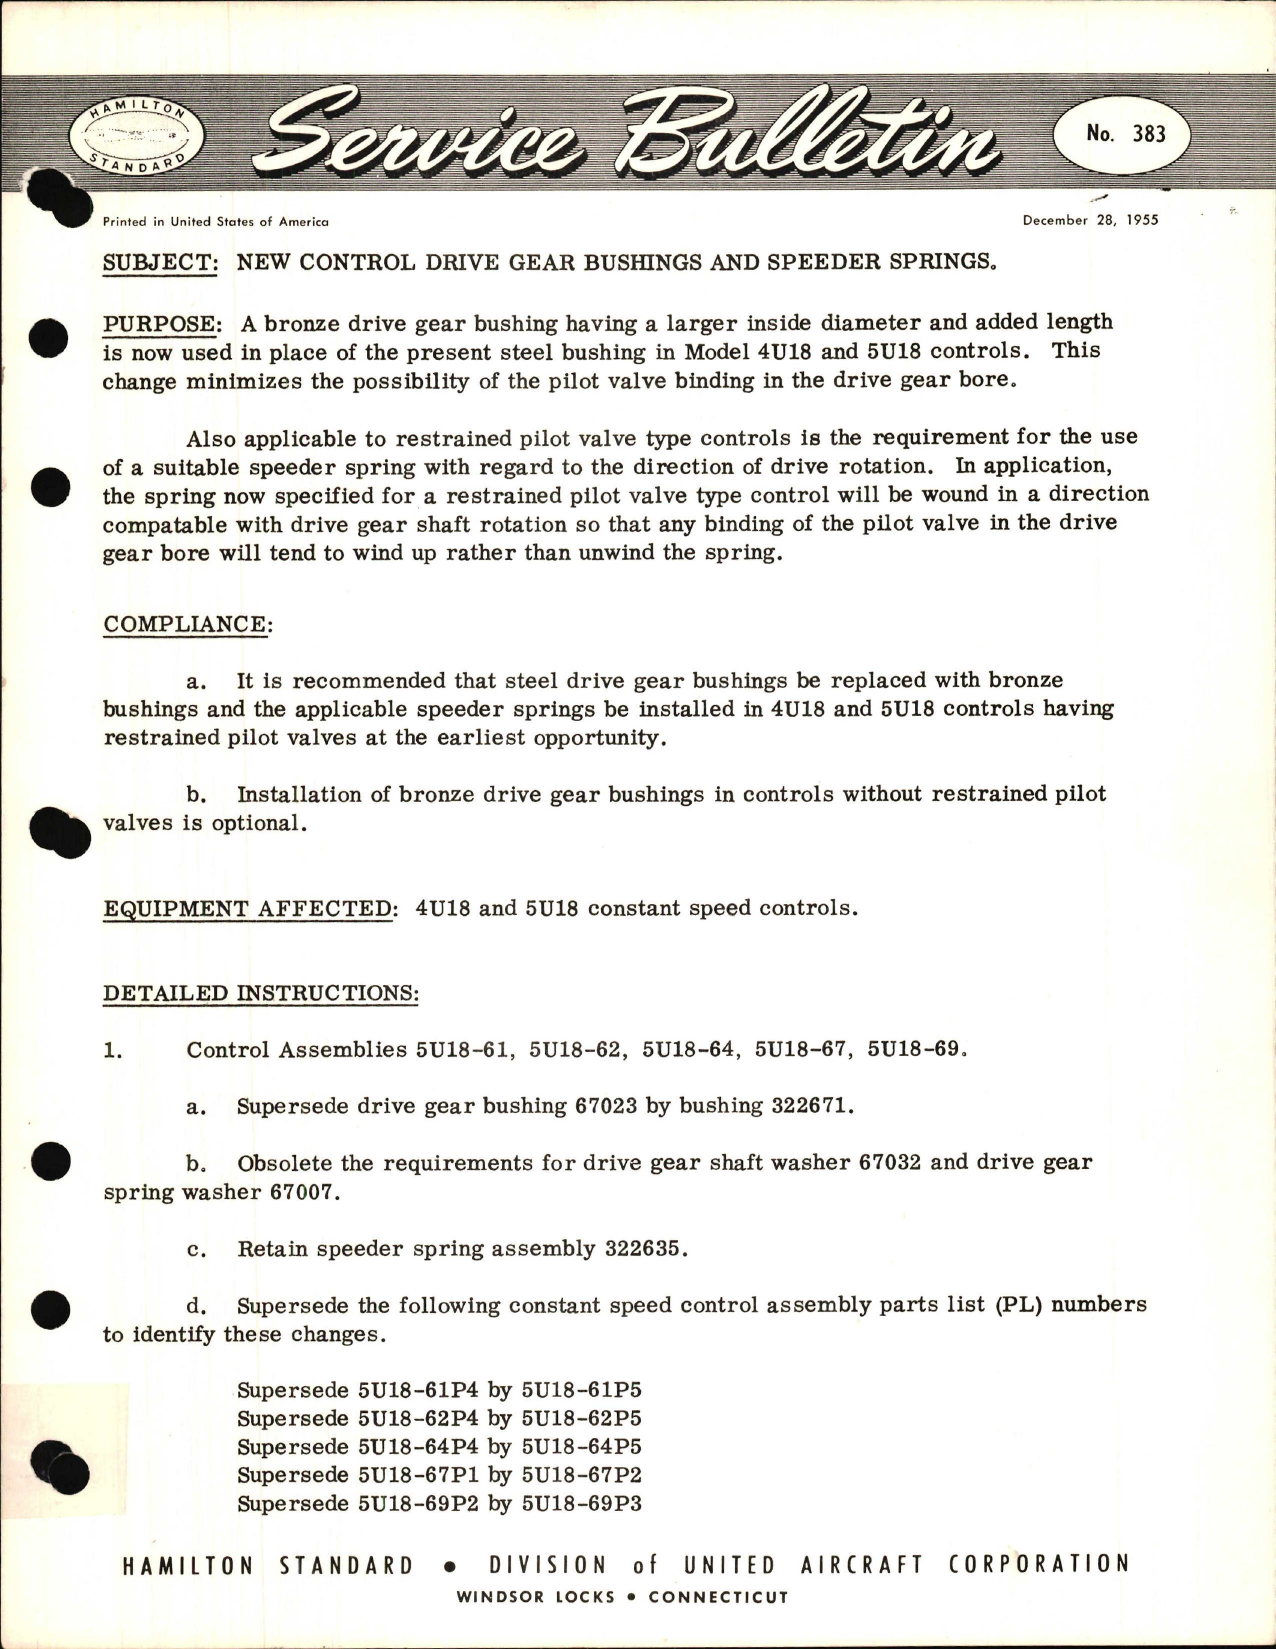 Sample page 1 from AirCorps Library document: New Control Drive Gear Bushings and Speeder Springs